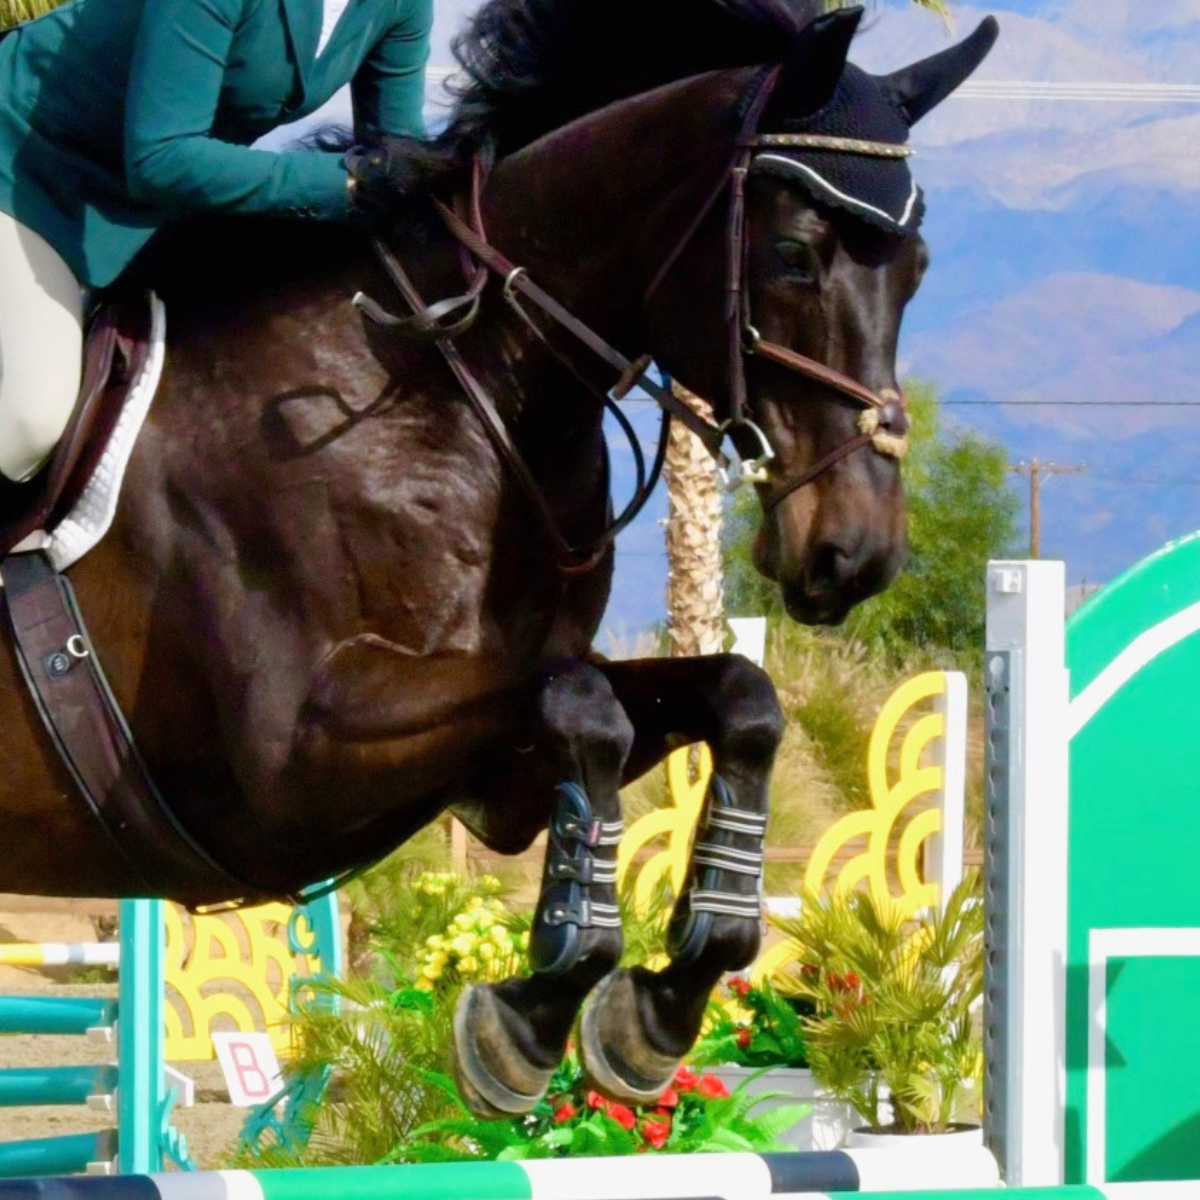 Dark Bay horse jumps in EquiFit tendon boots.